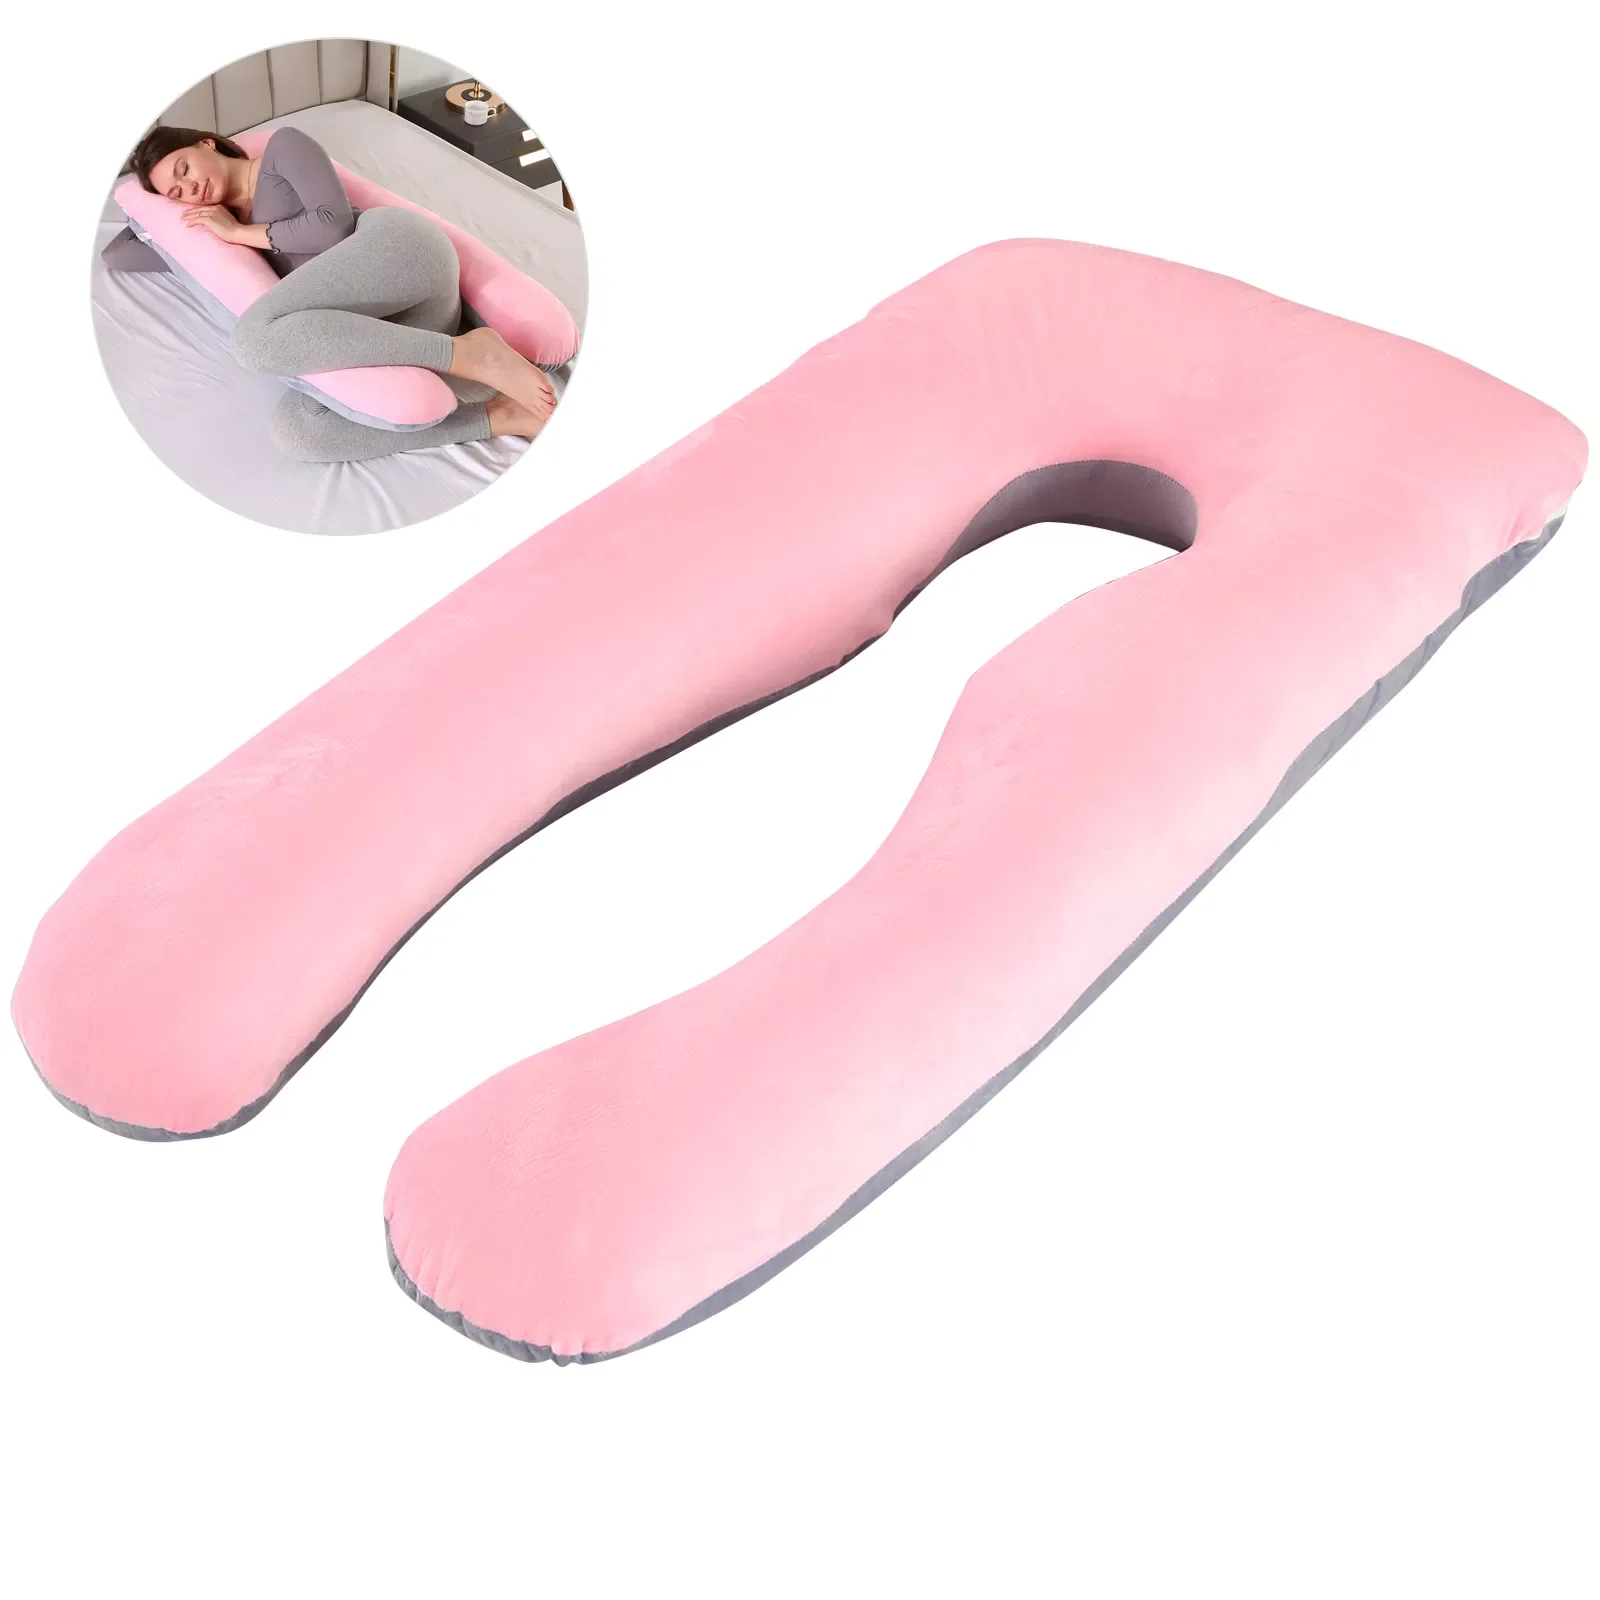 Pregnancy Pillow Sleeping Support Pillow For Pregnant Women Body U Shape Maternity Pregnancy Pillows Side Sleepers Bedding